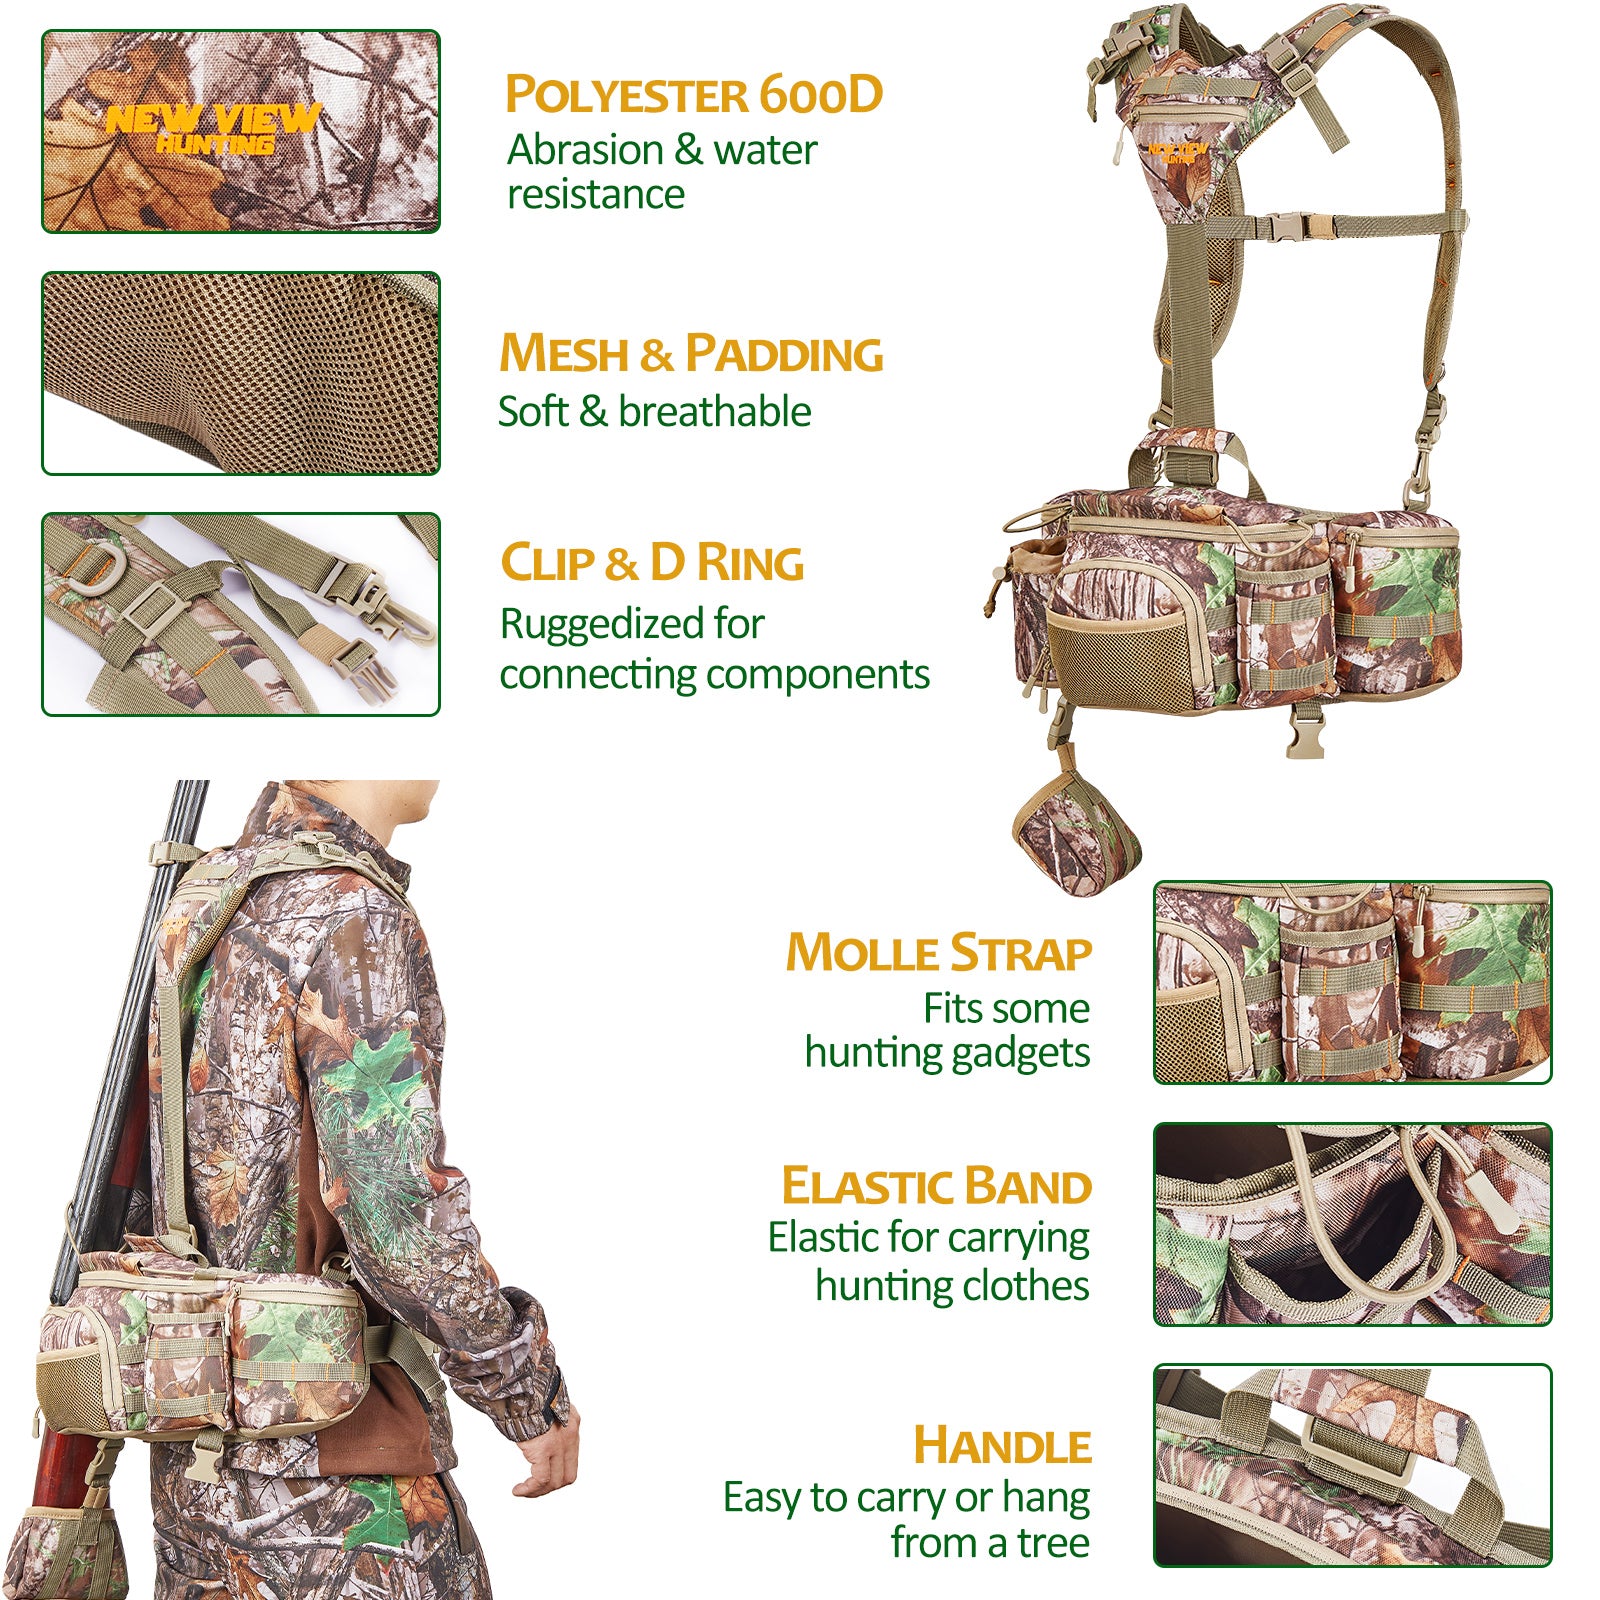 Mossy Oak Brand Camouflage Hunting Waist Pack with Harness, Camo 